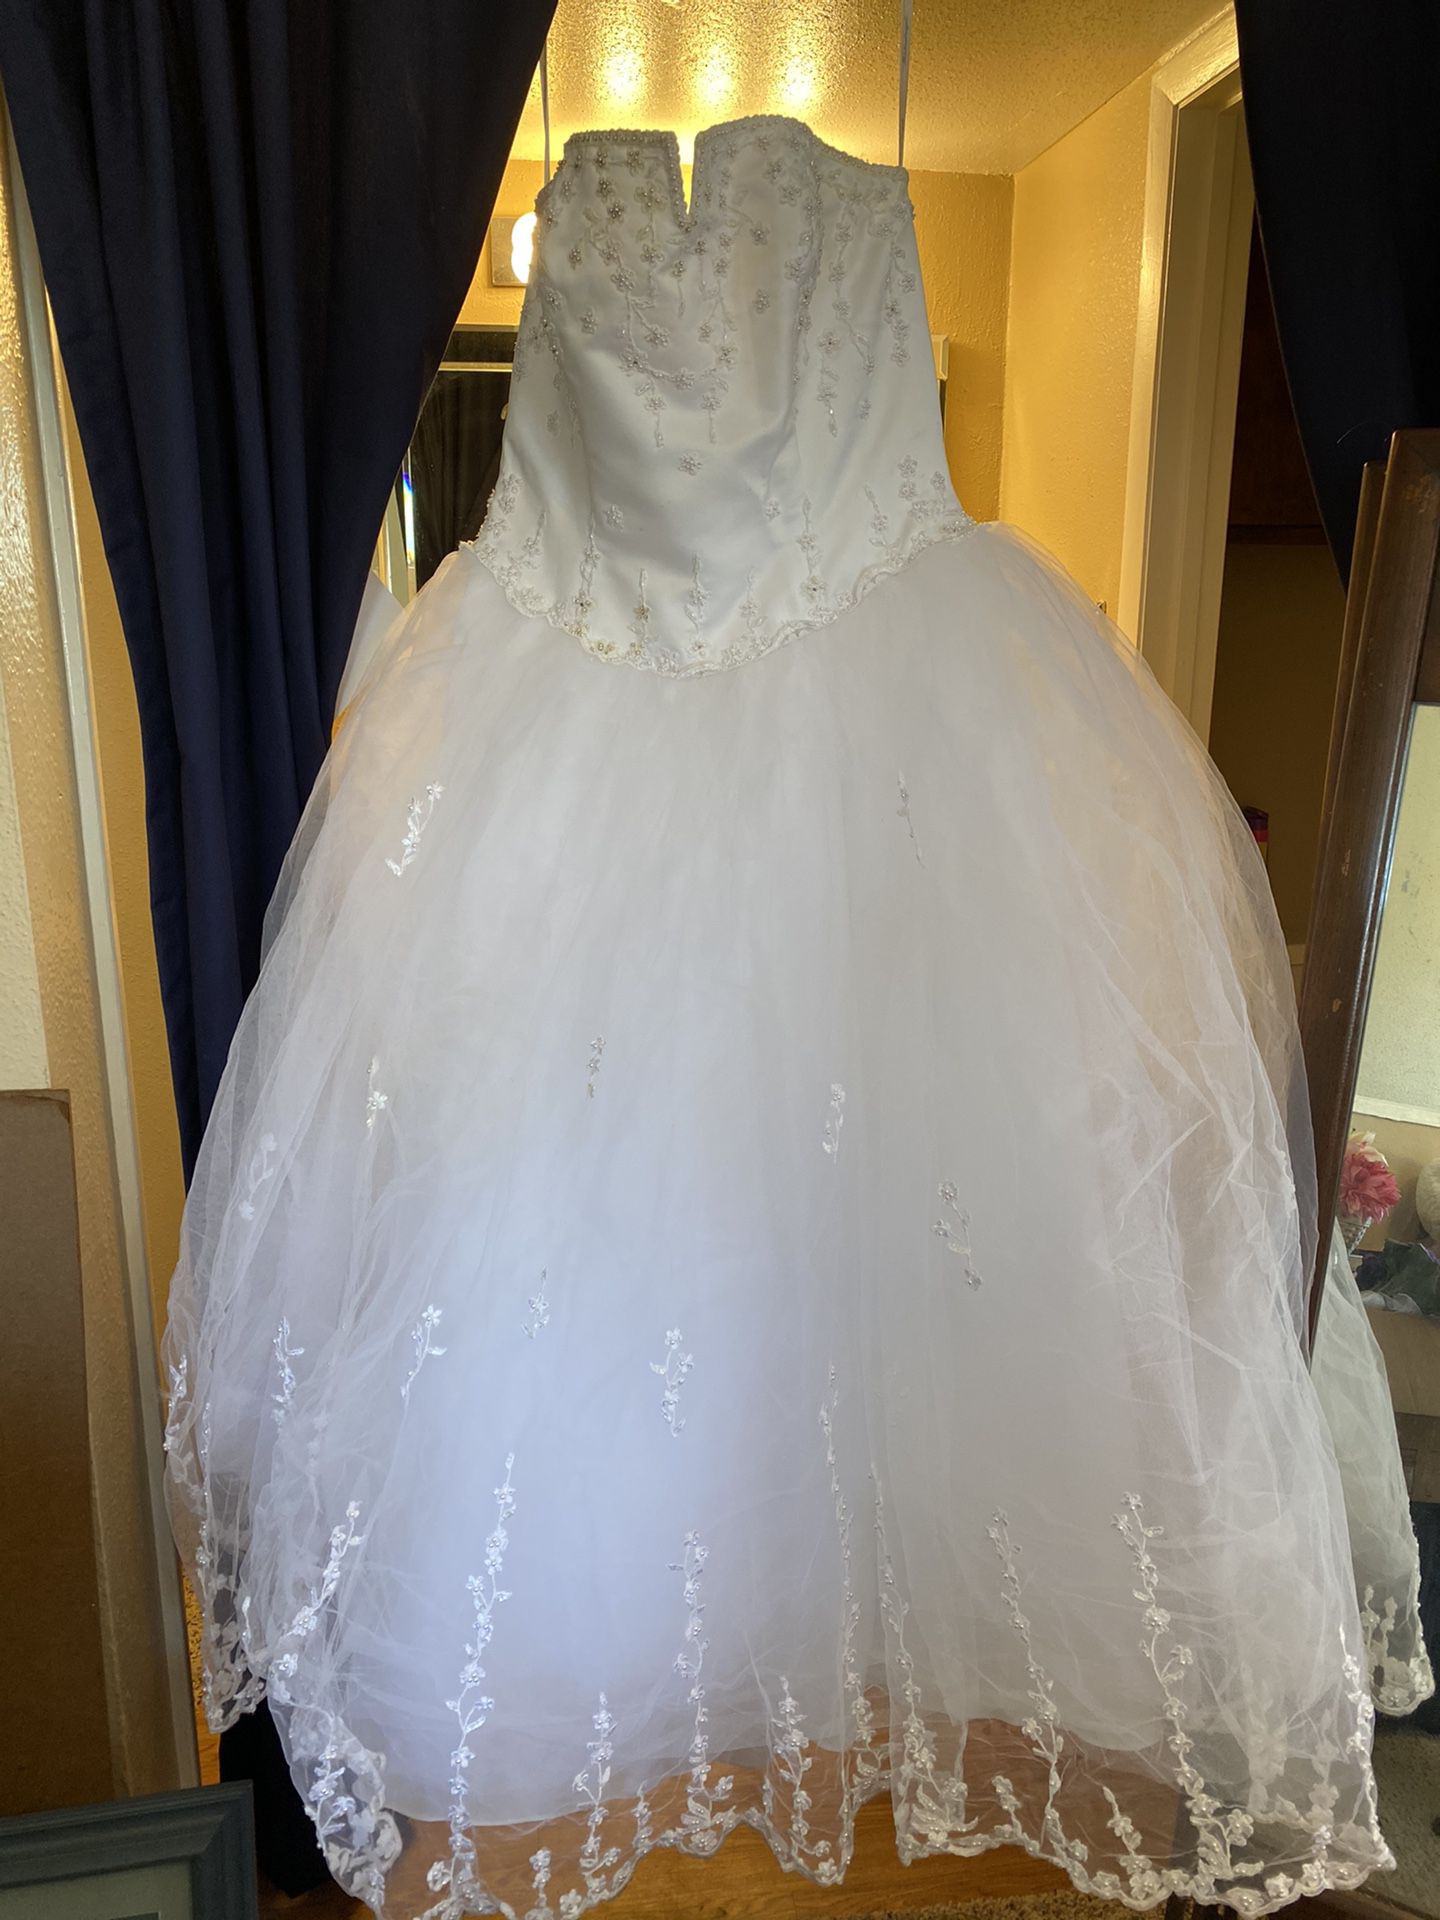 Strapless Tulle Ball Gown Wedding Dress Size 18